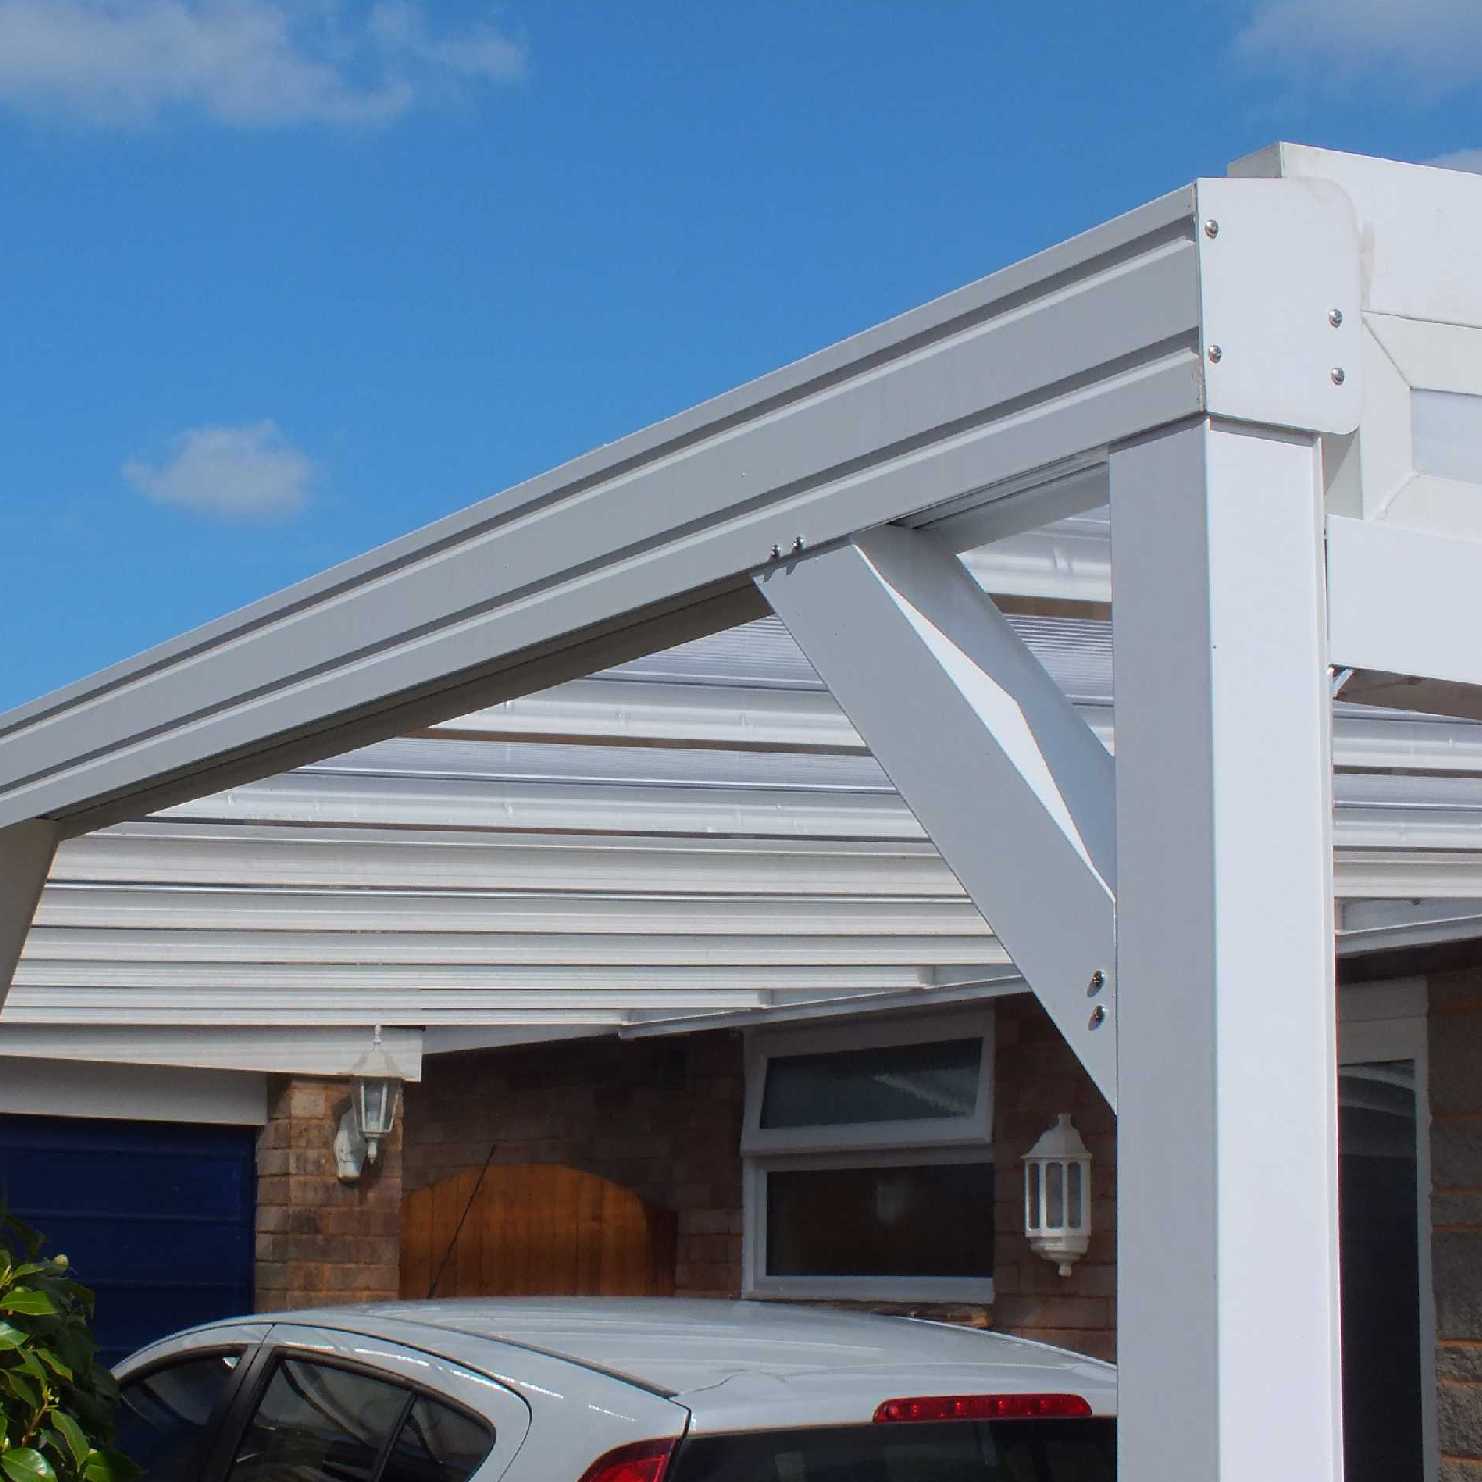 Great deals on Omega Smart Lean-To Canopy, White with 16mm Polycarbonate Glazing - 7.4m (W) x 2.0m (P), (4) Supporting Posts